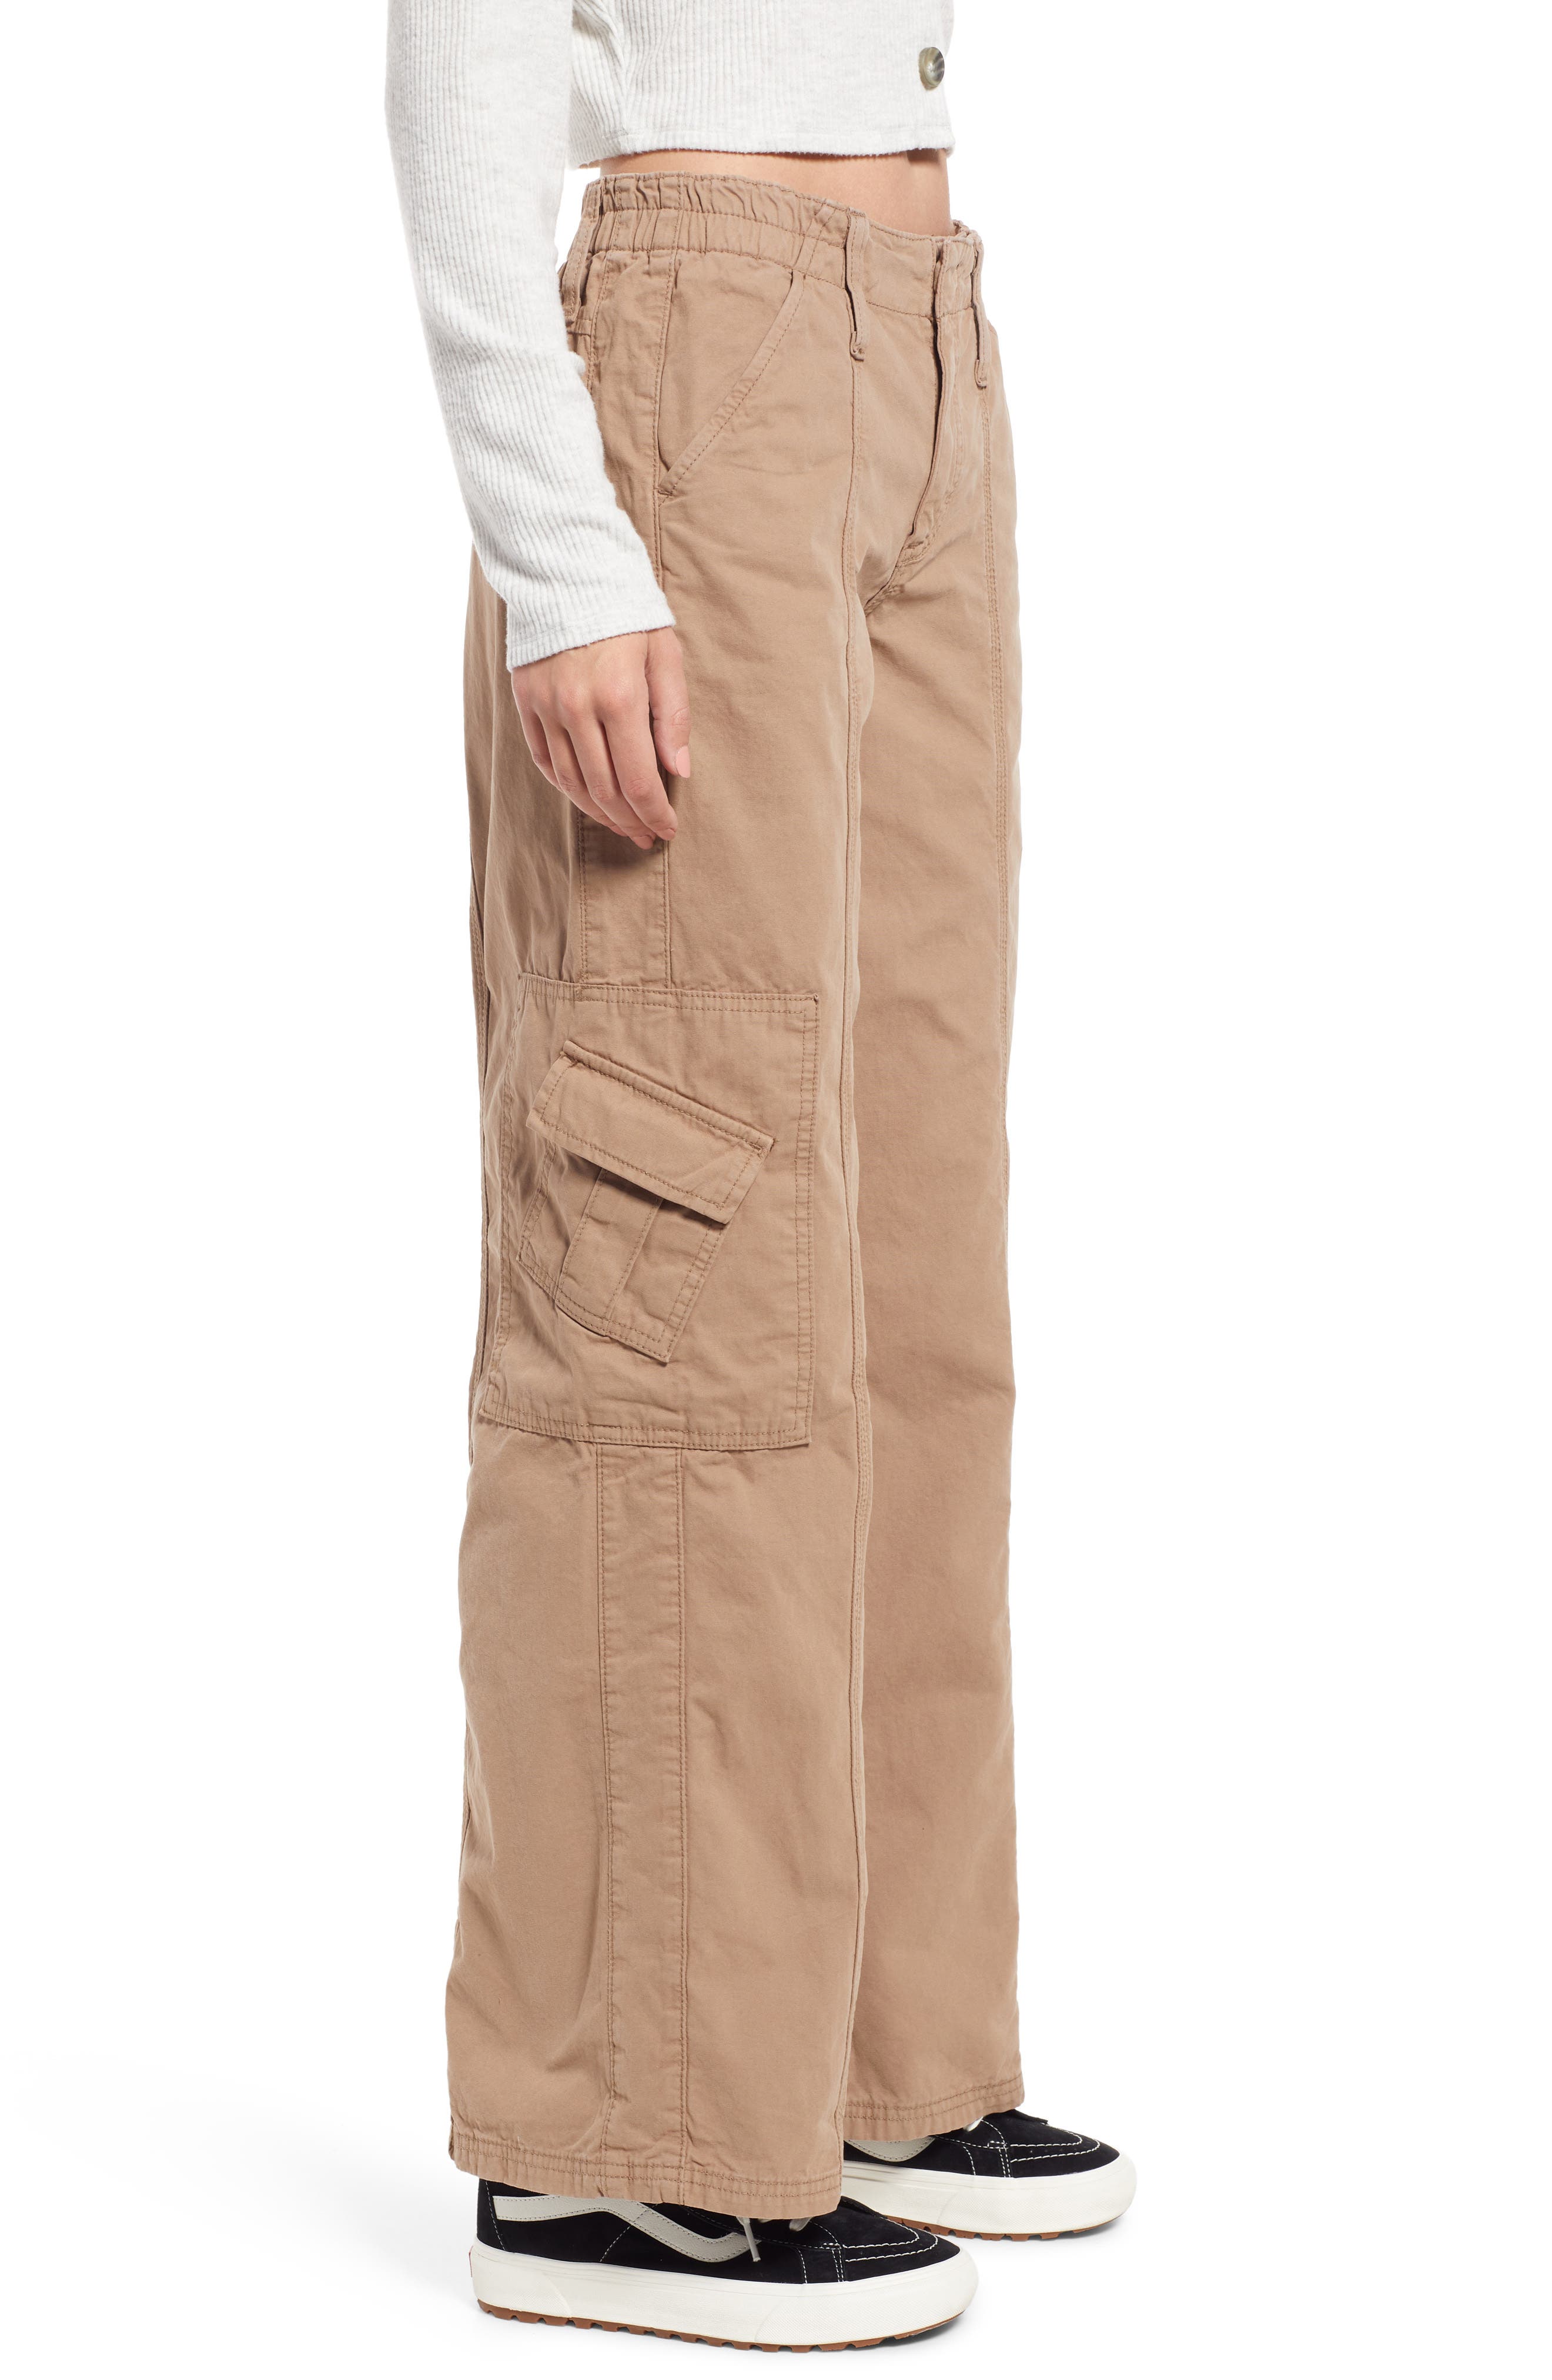 Urban Outfitters BDG Cyber Corduroy Y2K Cargo Pant